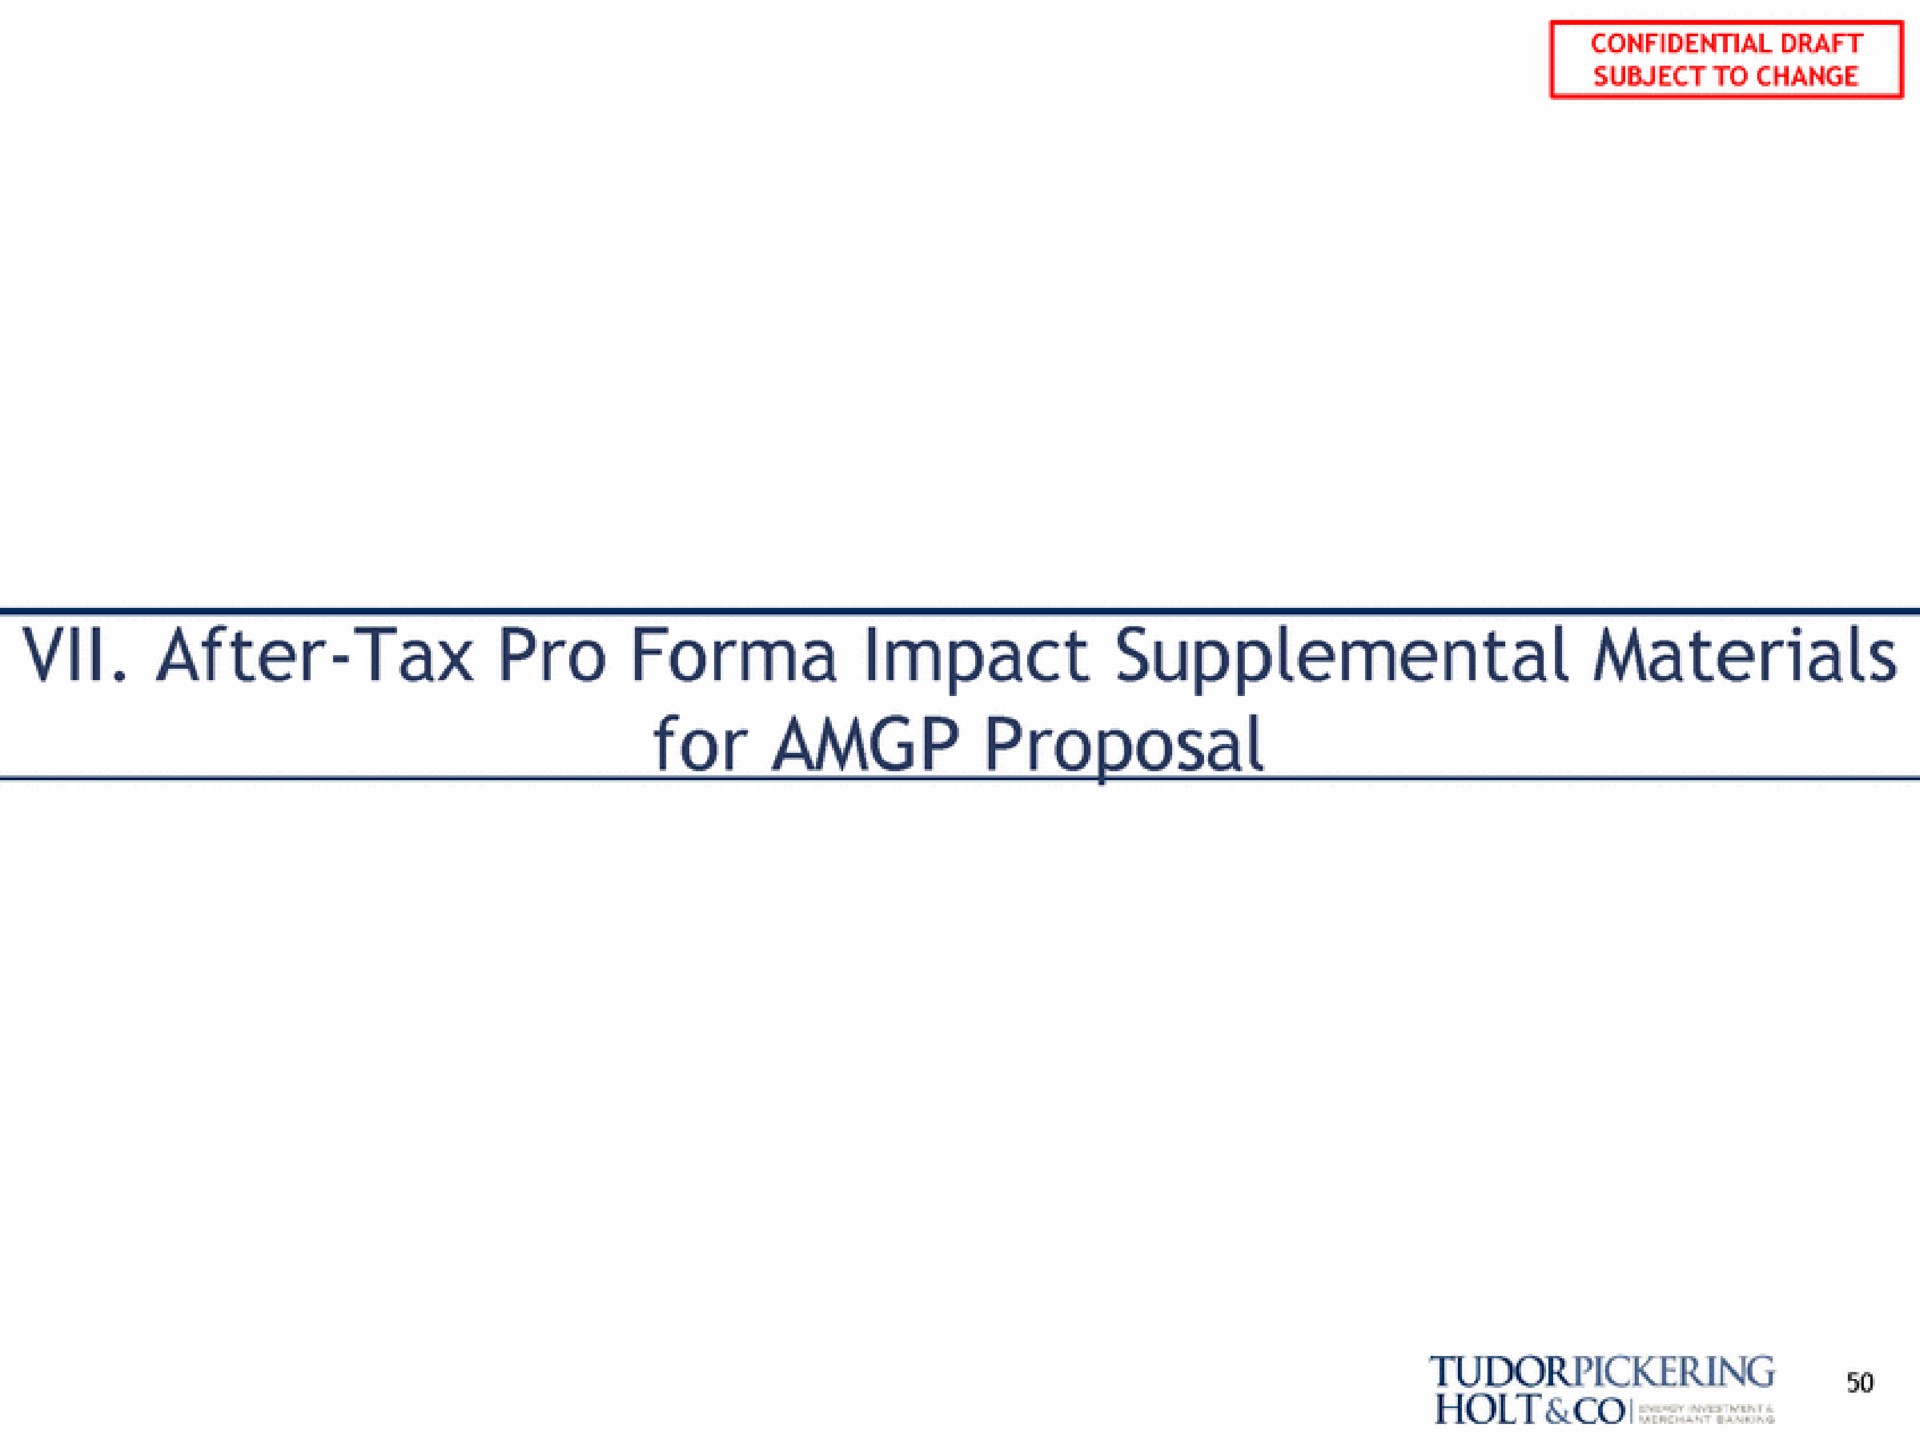 subject to change after tax pro impact supplemental materials for proposal | Tudor, Pickering, Holt & Co